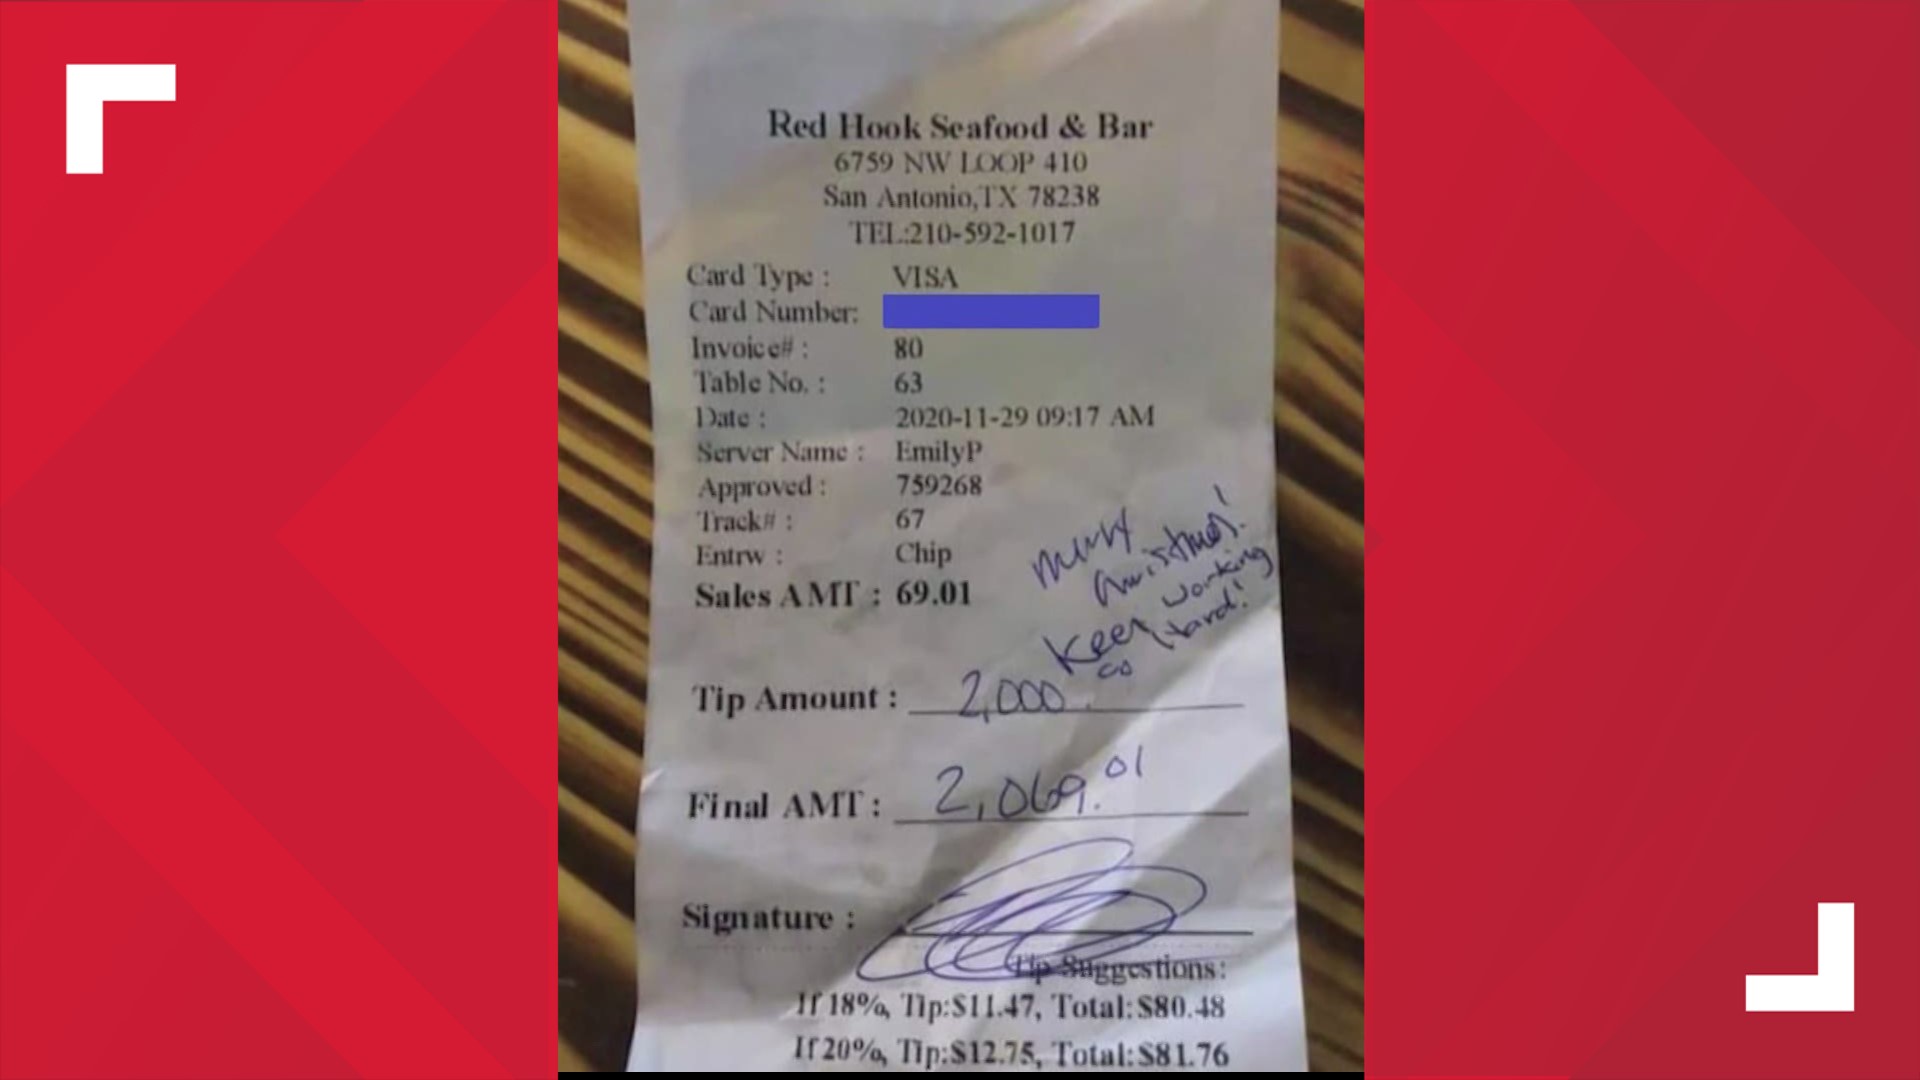 A local server received a $2,000 tip as an early Christmas gift but she can’t get a single cent. Her employer said they can’t process a tip bigger than $500.